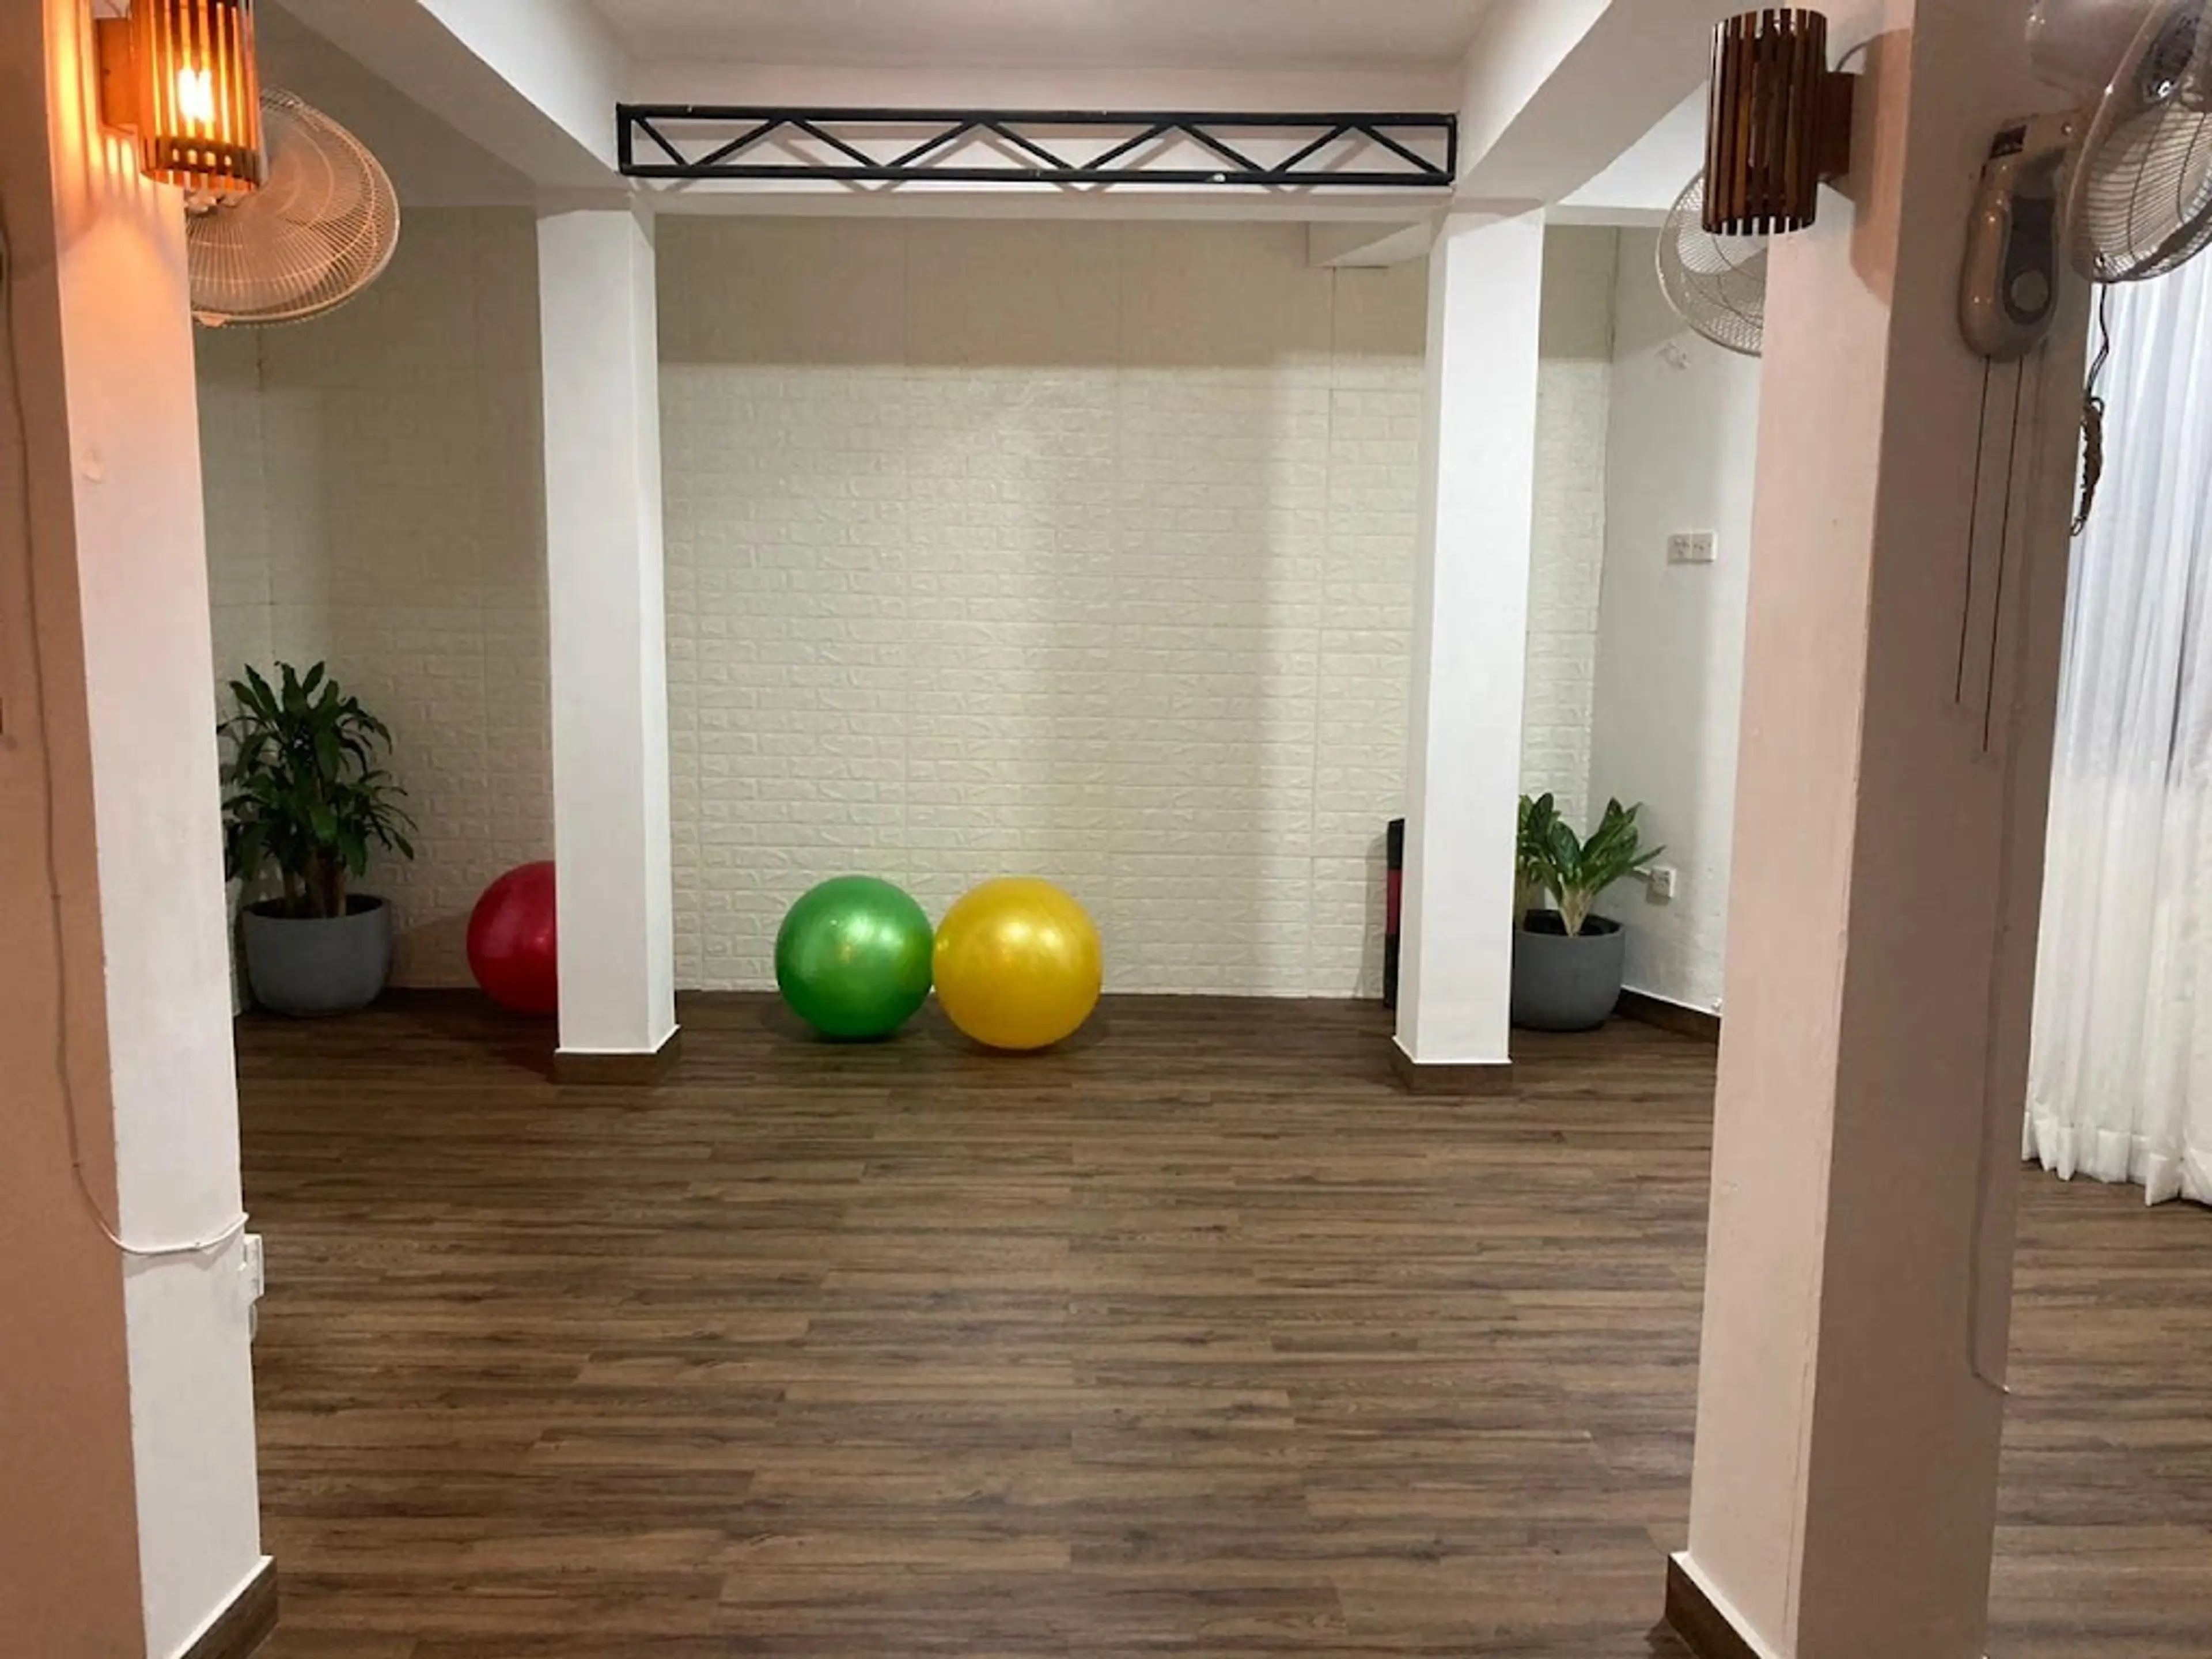 Yoga session at a wellness center